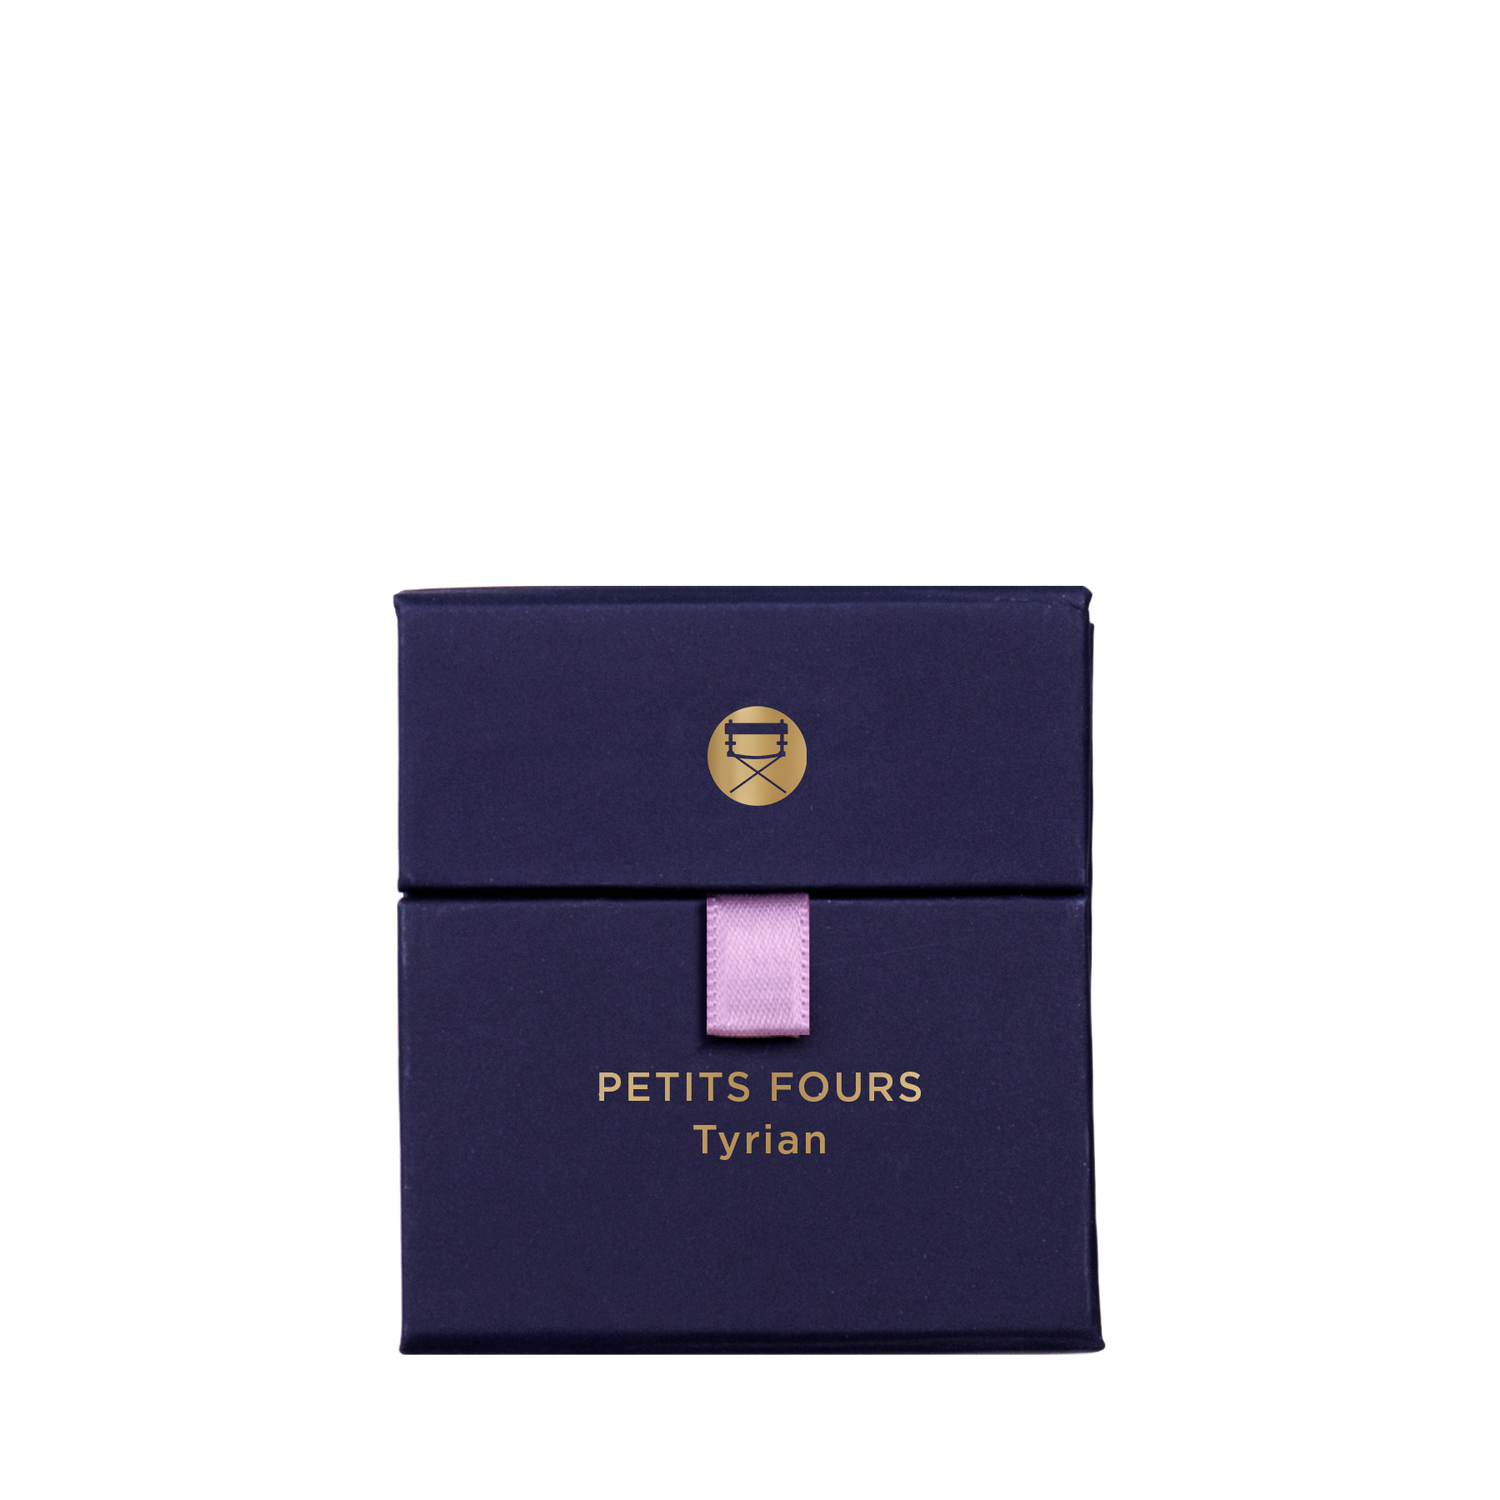 PETITS FOURS - TYRIAN